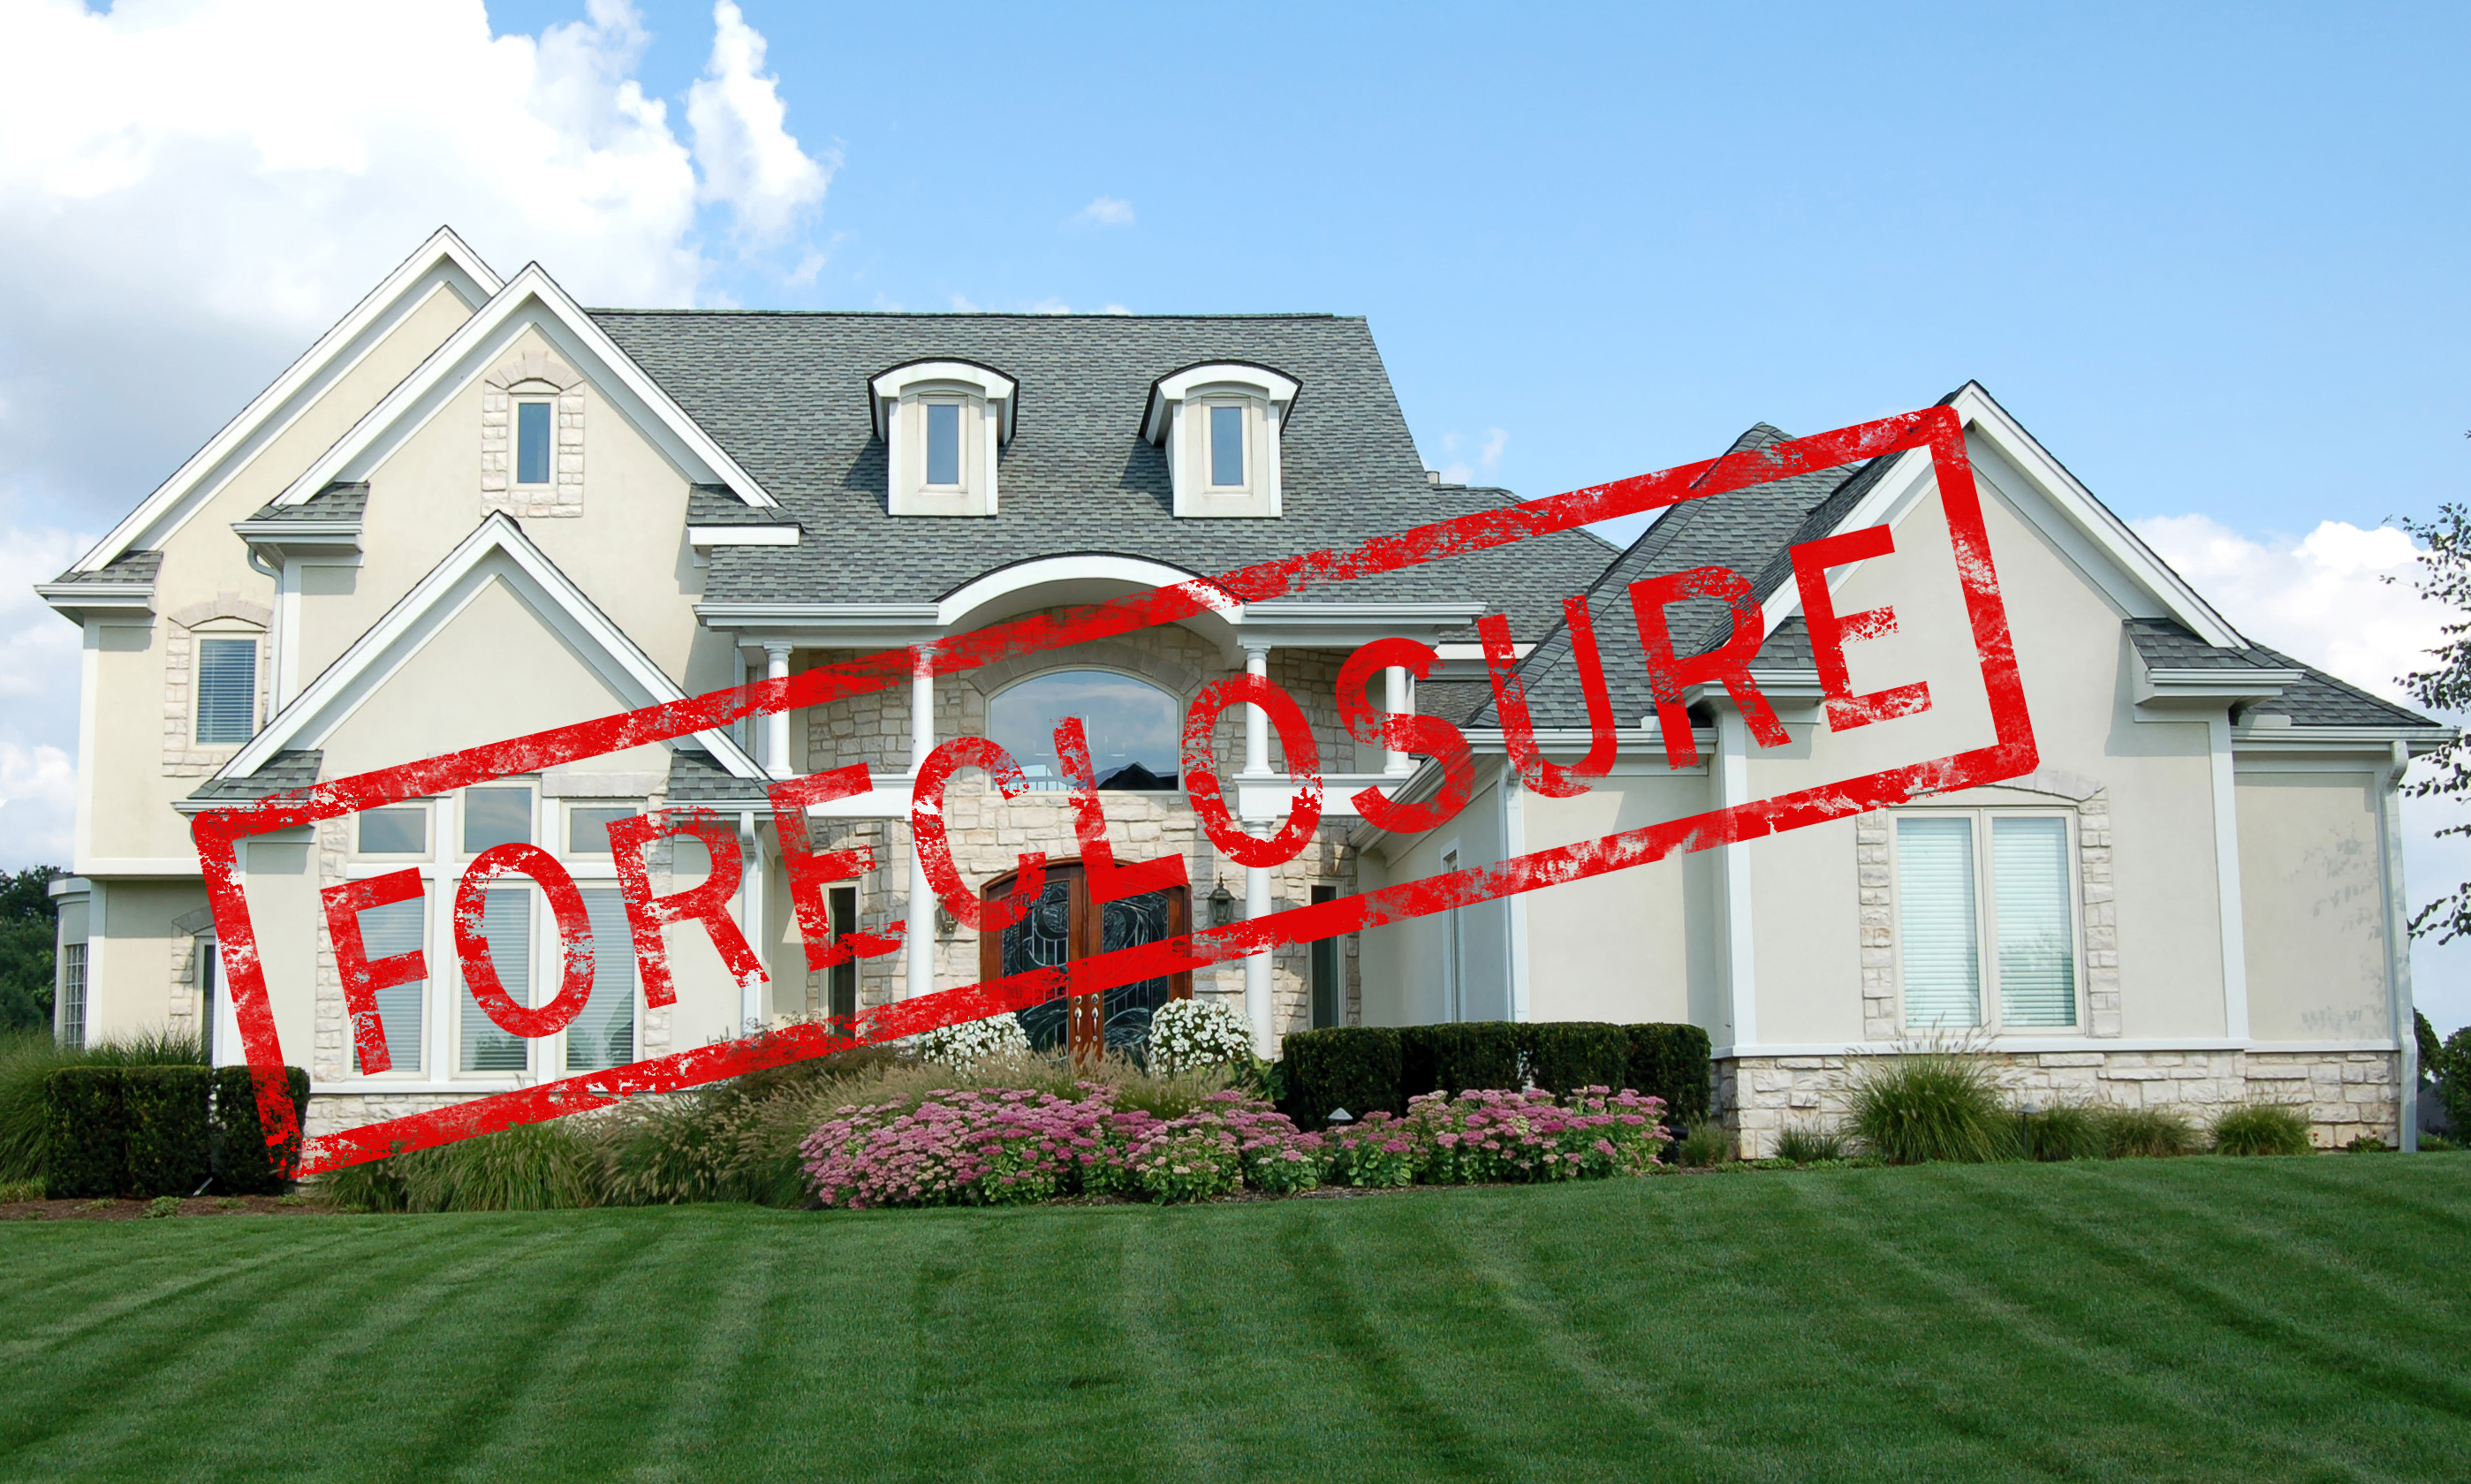 Call The August Group Inc. to discuss valuations for Saint Louis foreclosures